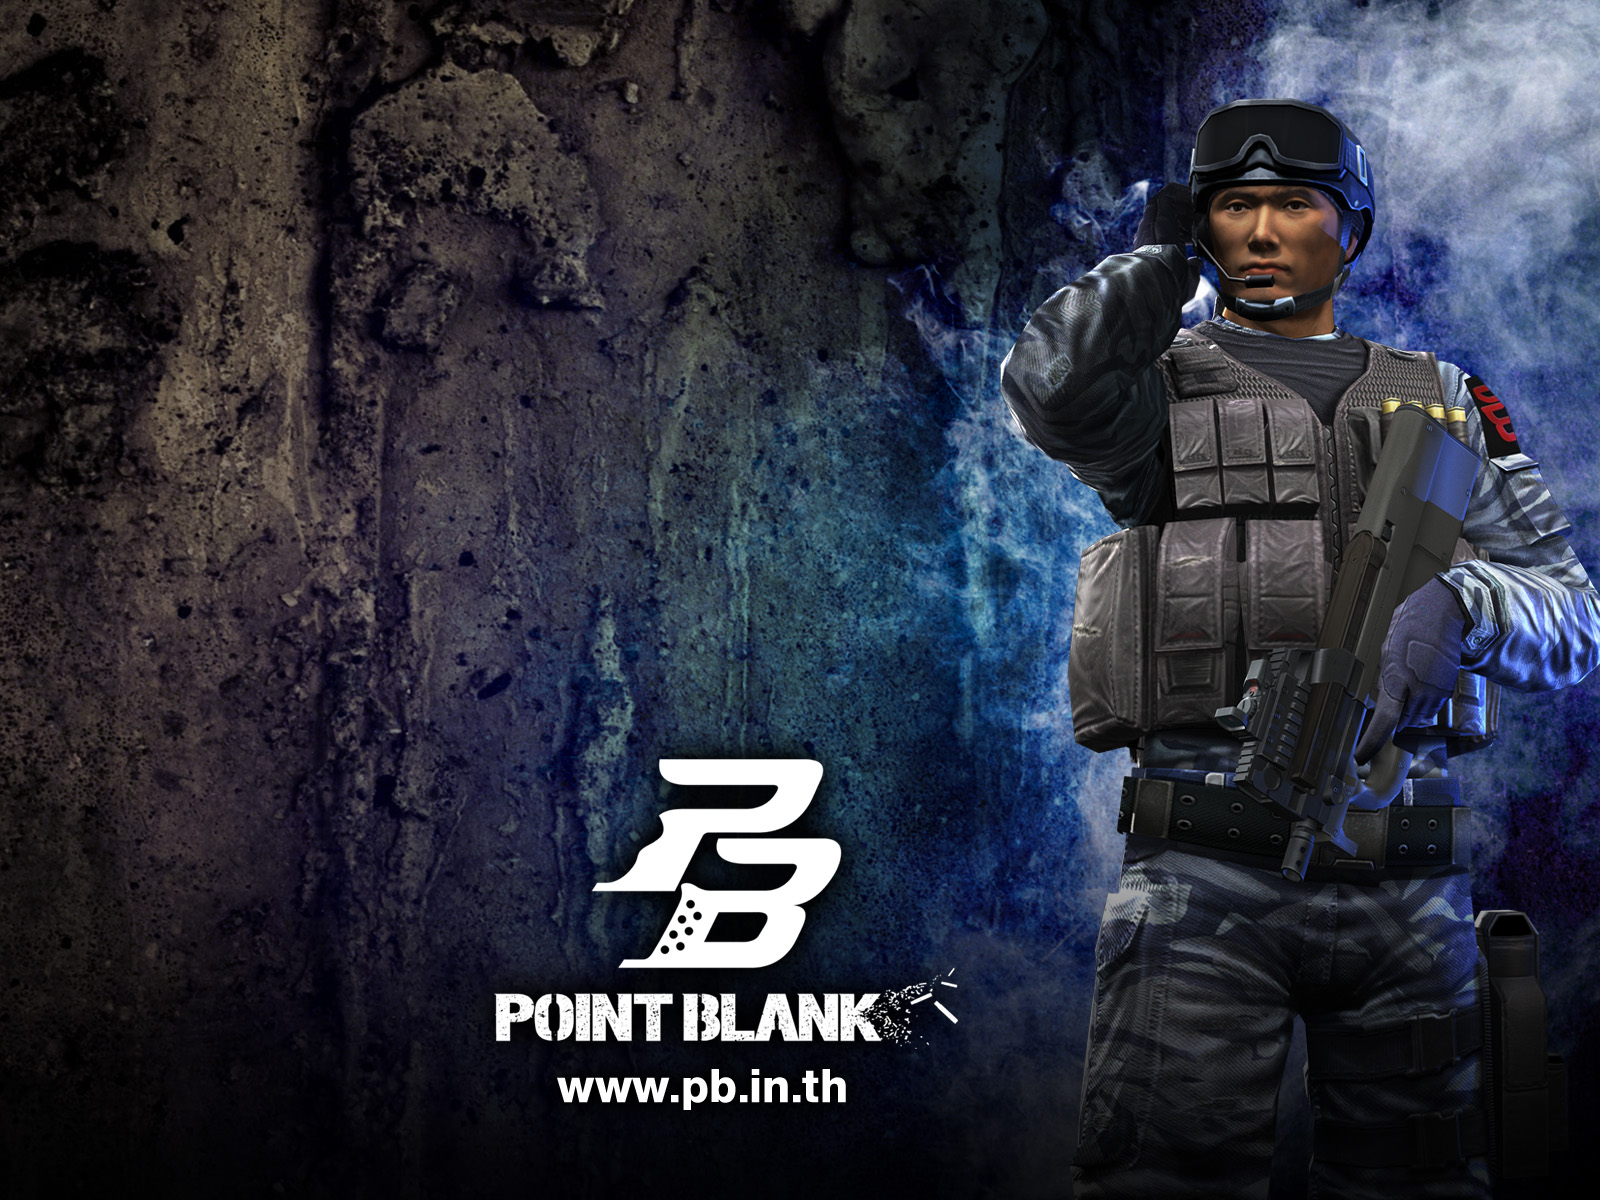 wallpaper point blank keren,action adventure game,shooter game,soldier,movie,pc game